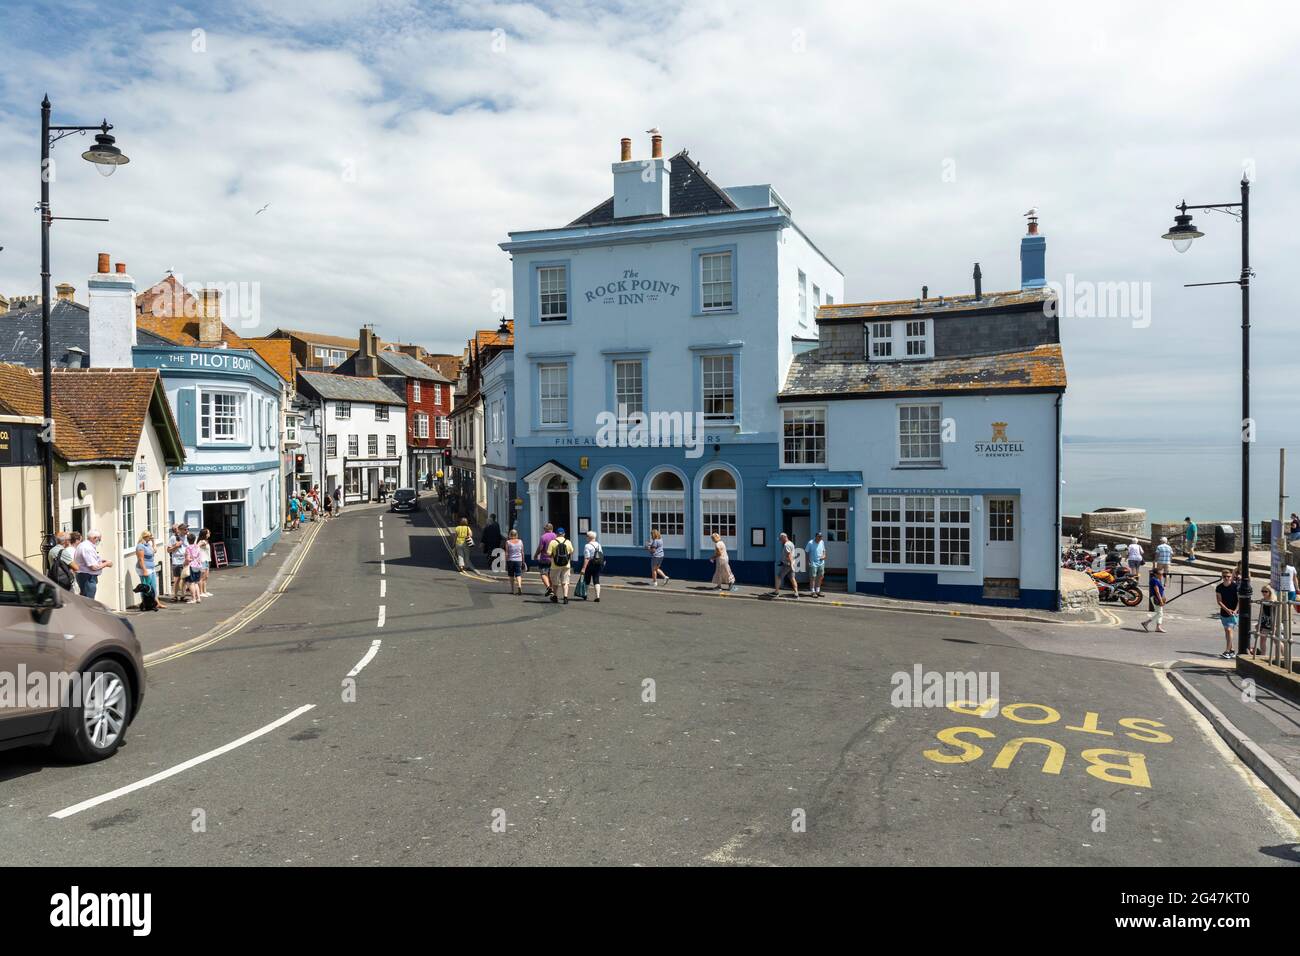 Rock Point Inn is a Grade II listed building on the beachfront in Lyme Regis, Dorset, England. Stock Photo